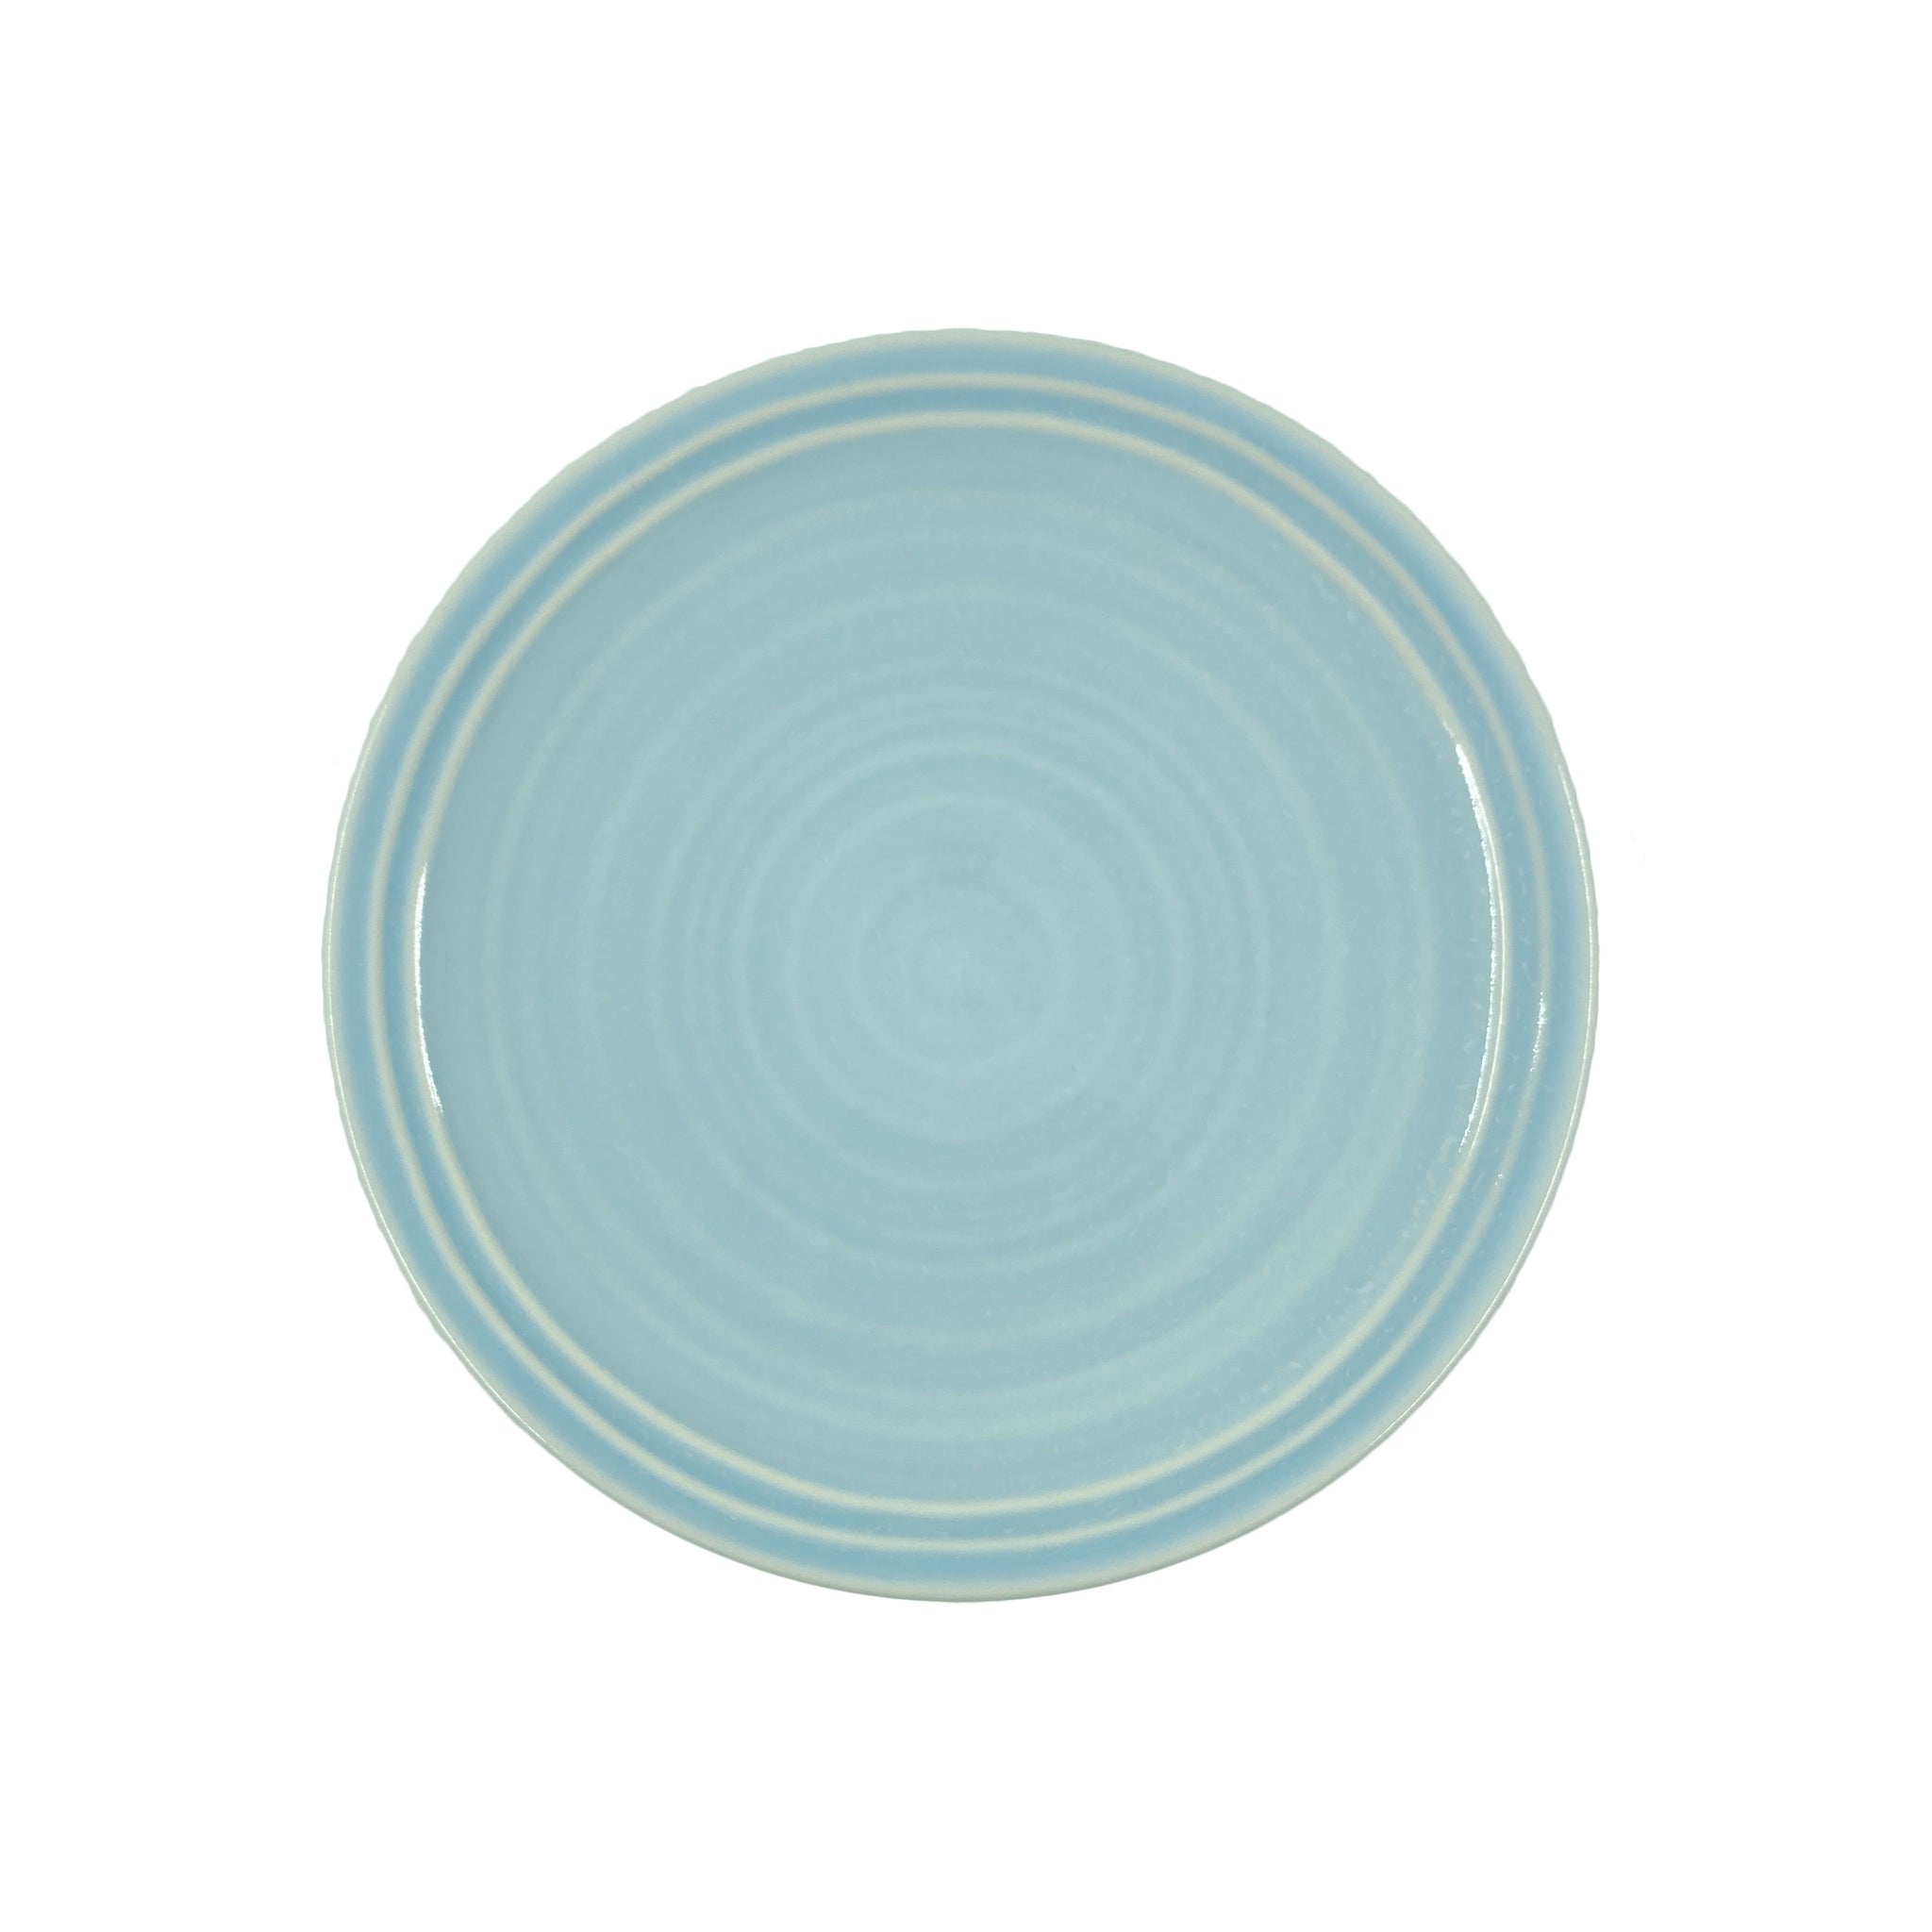 Lines Salad Plate - White/Blue - Set of 4